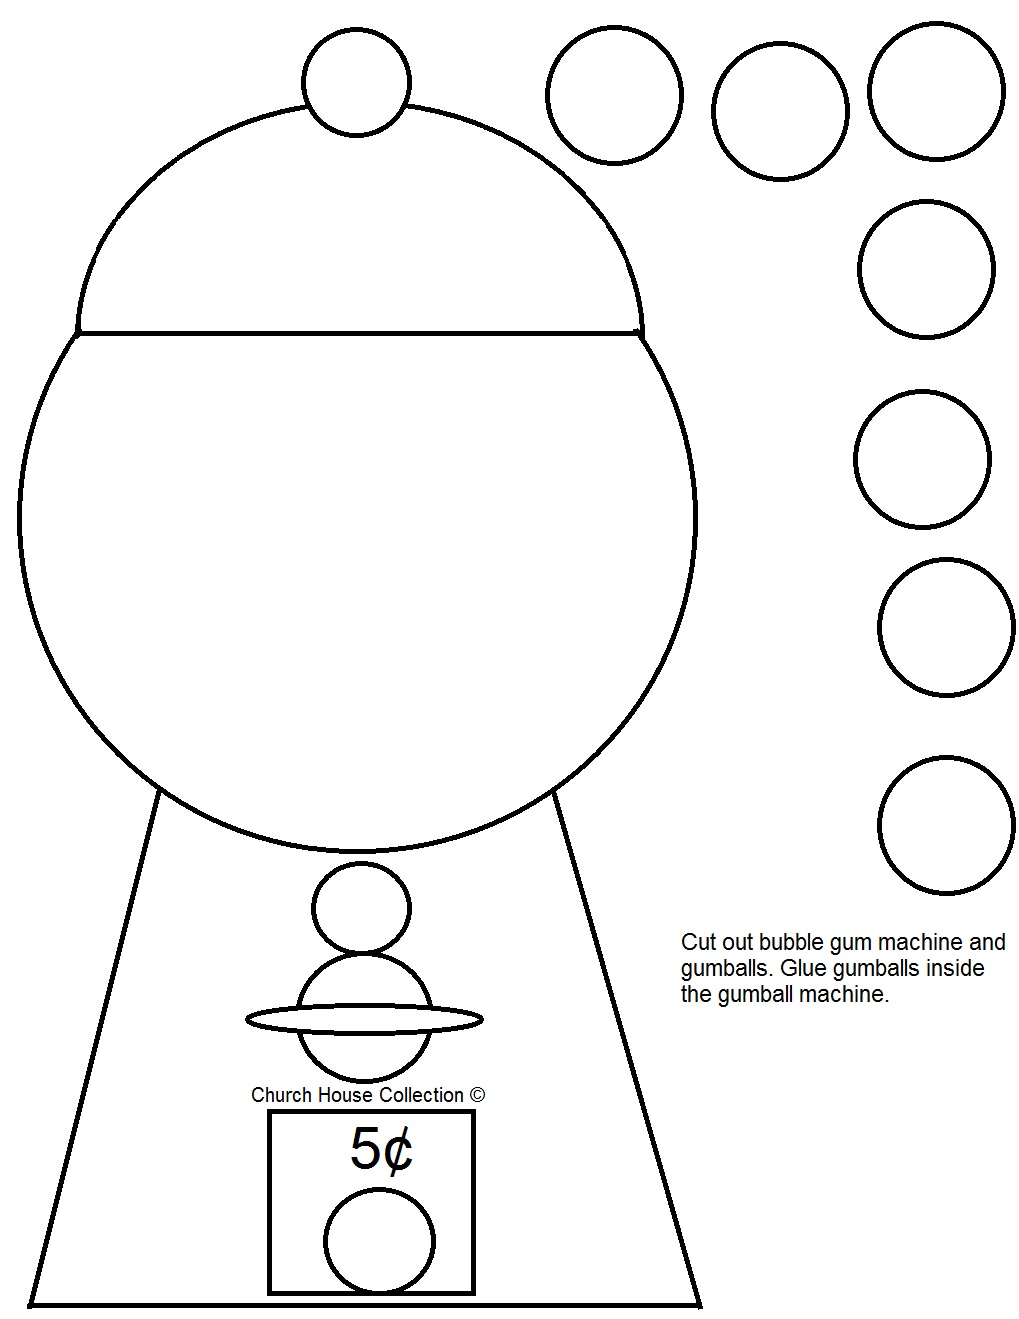 Church House Collection Blog: Gumball Machine Cut Out Craft For Psalms